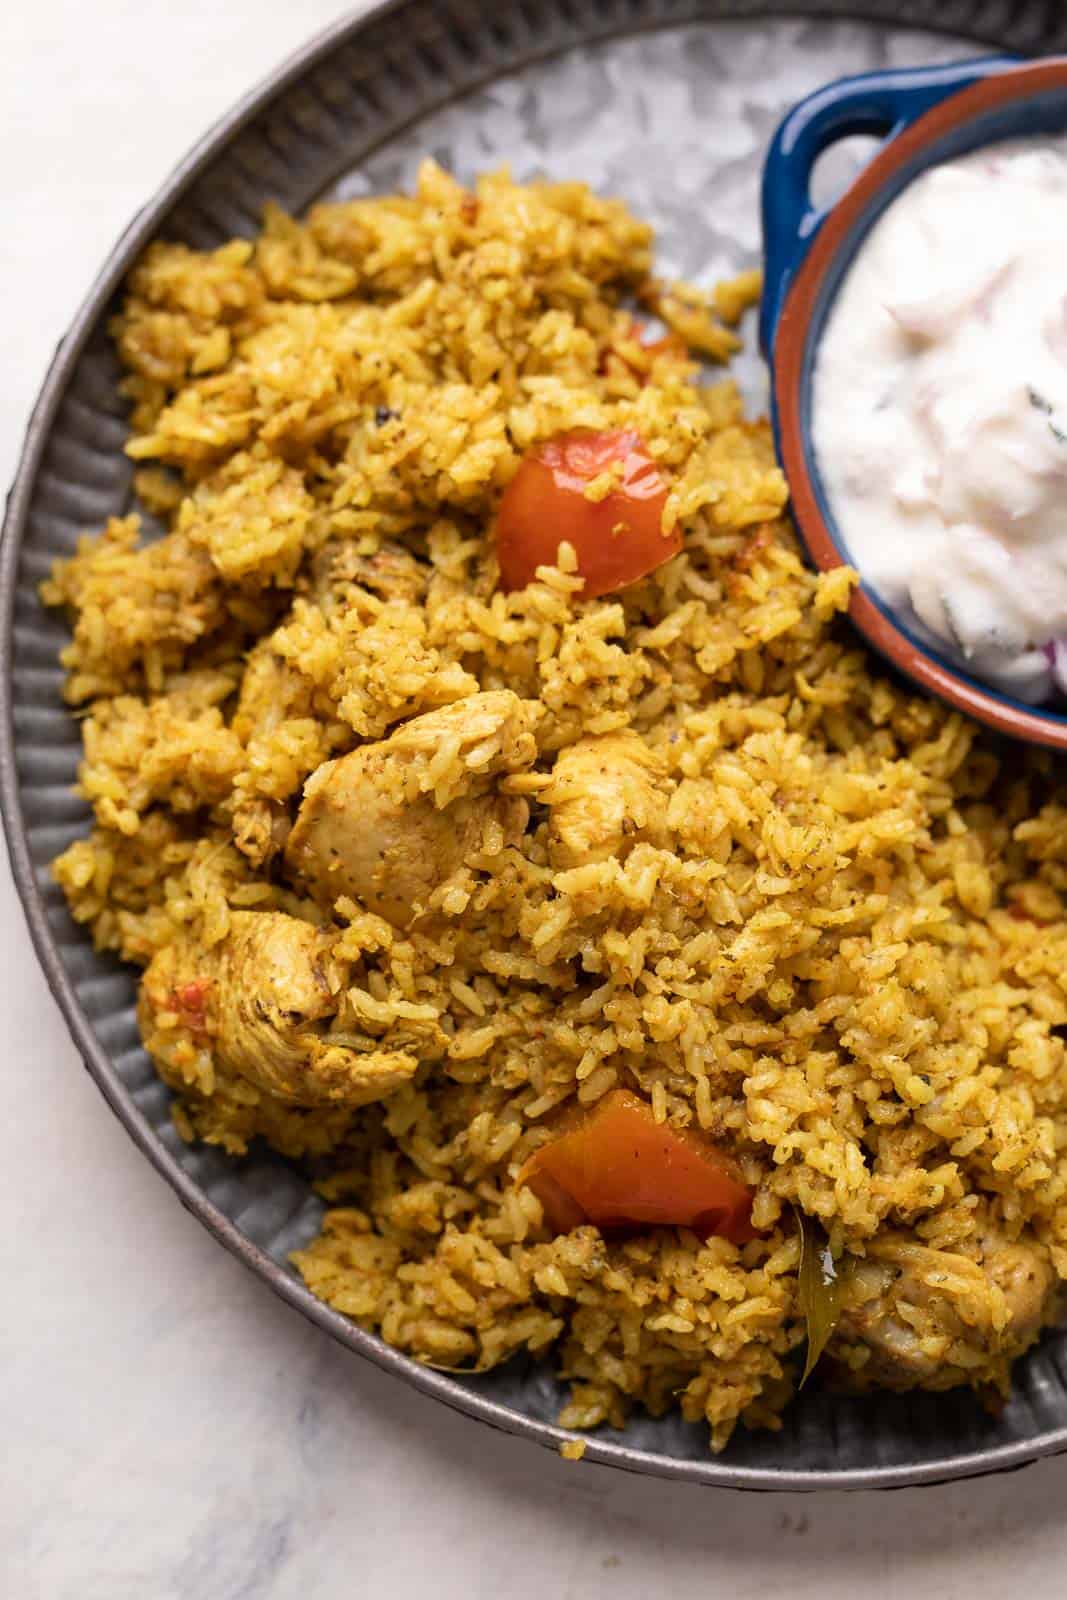 Chicken Pulao served on a grey plate with raita